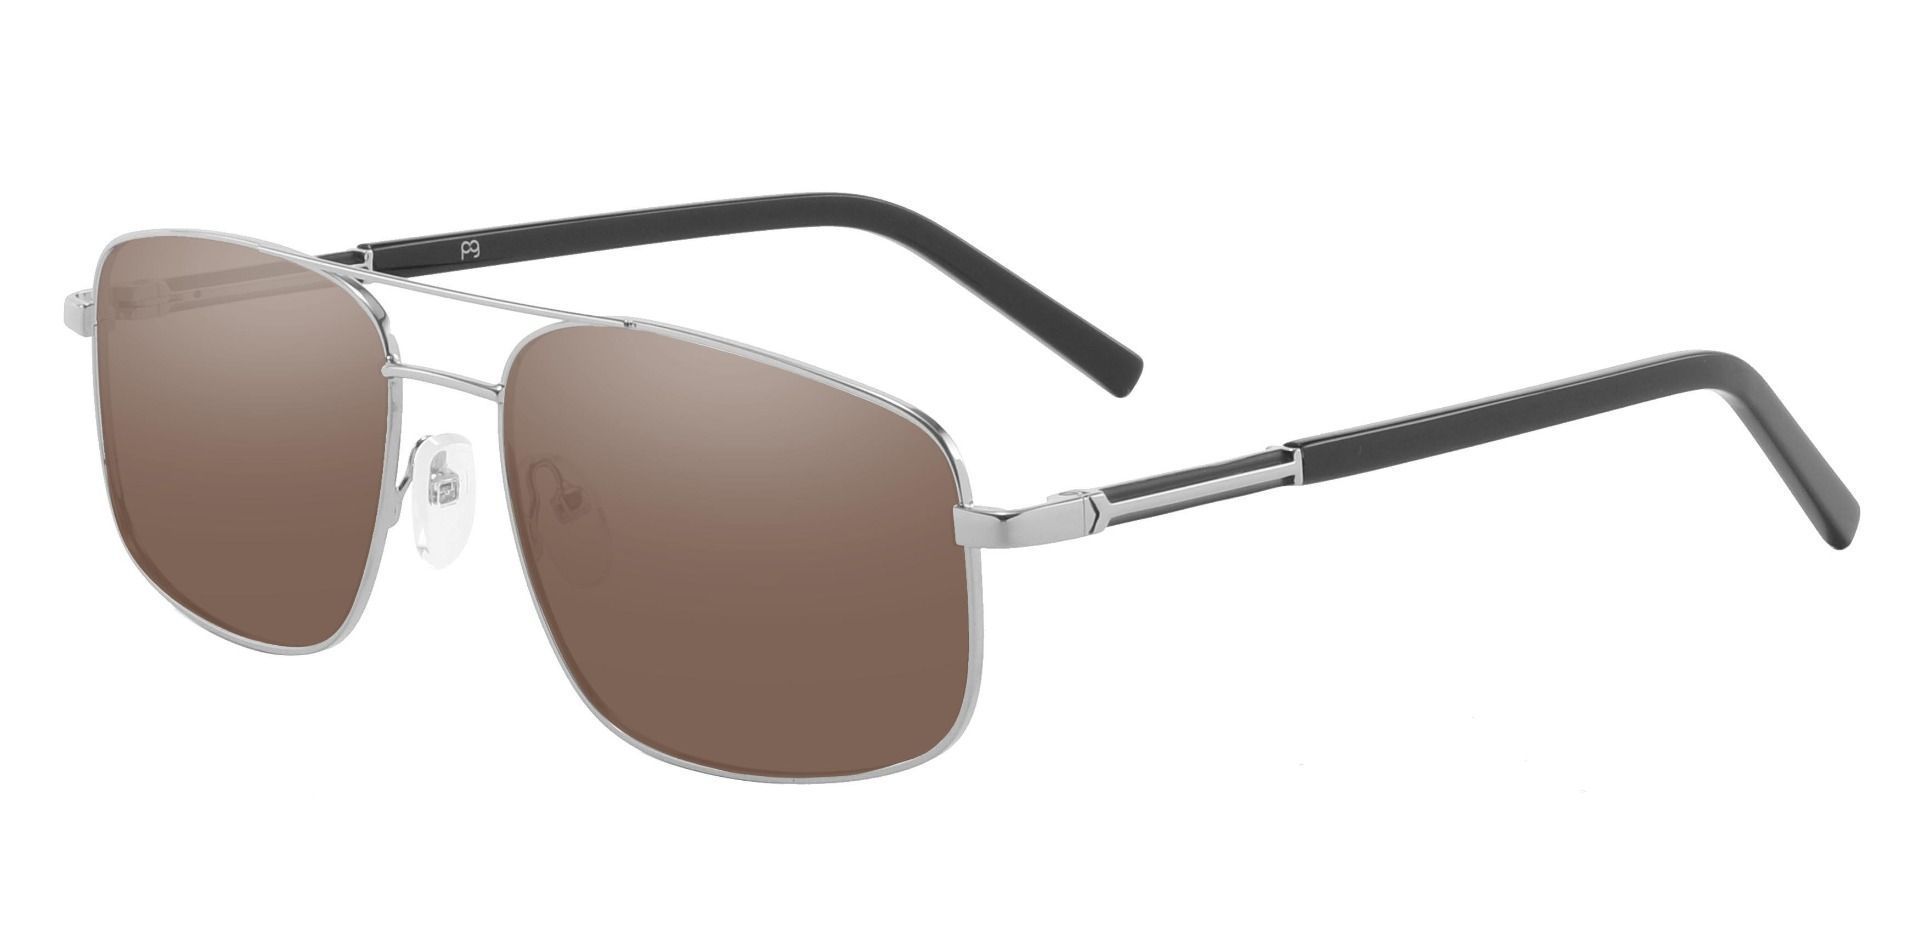 Davenport Aviator Lined Bifocal Sunglasses - Silver Frame With Brown Lenses